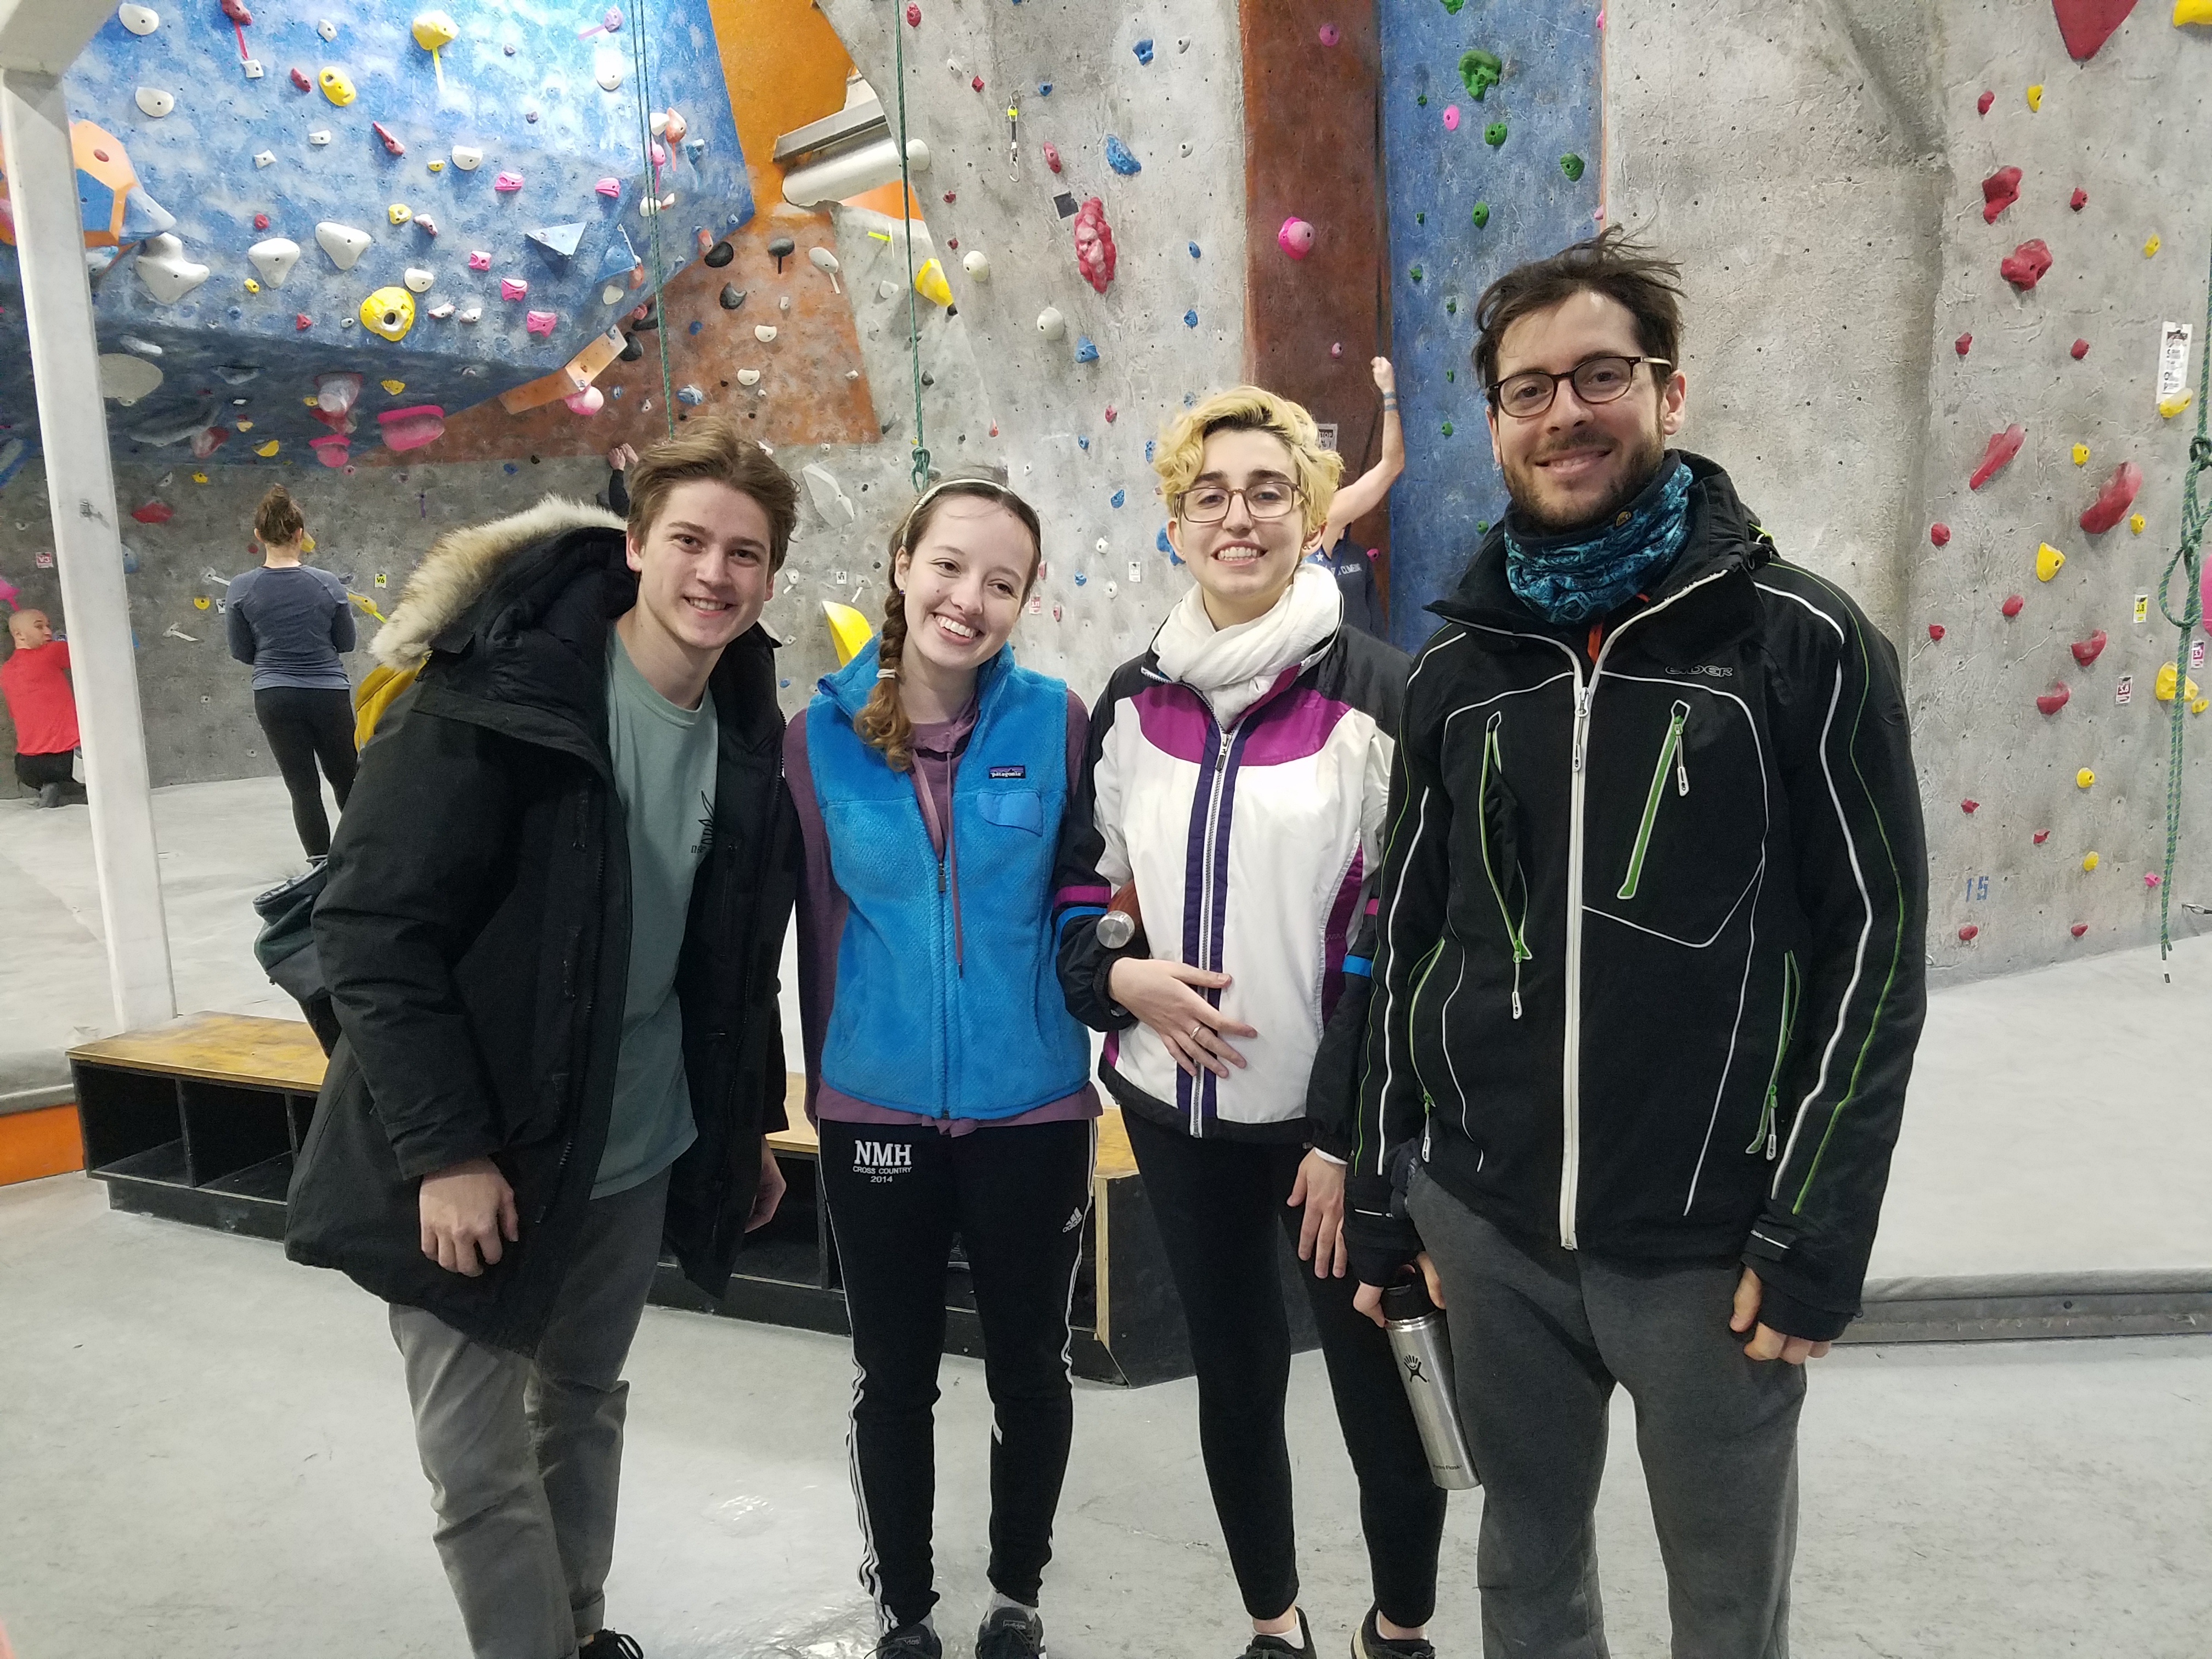 Students at a rock climbing event